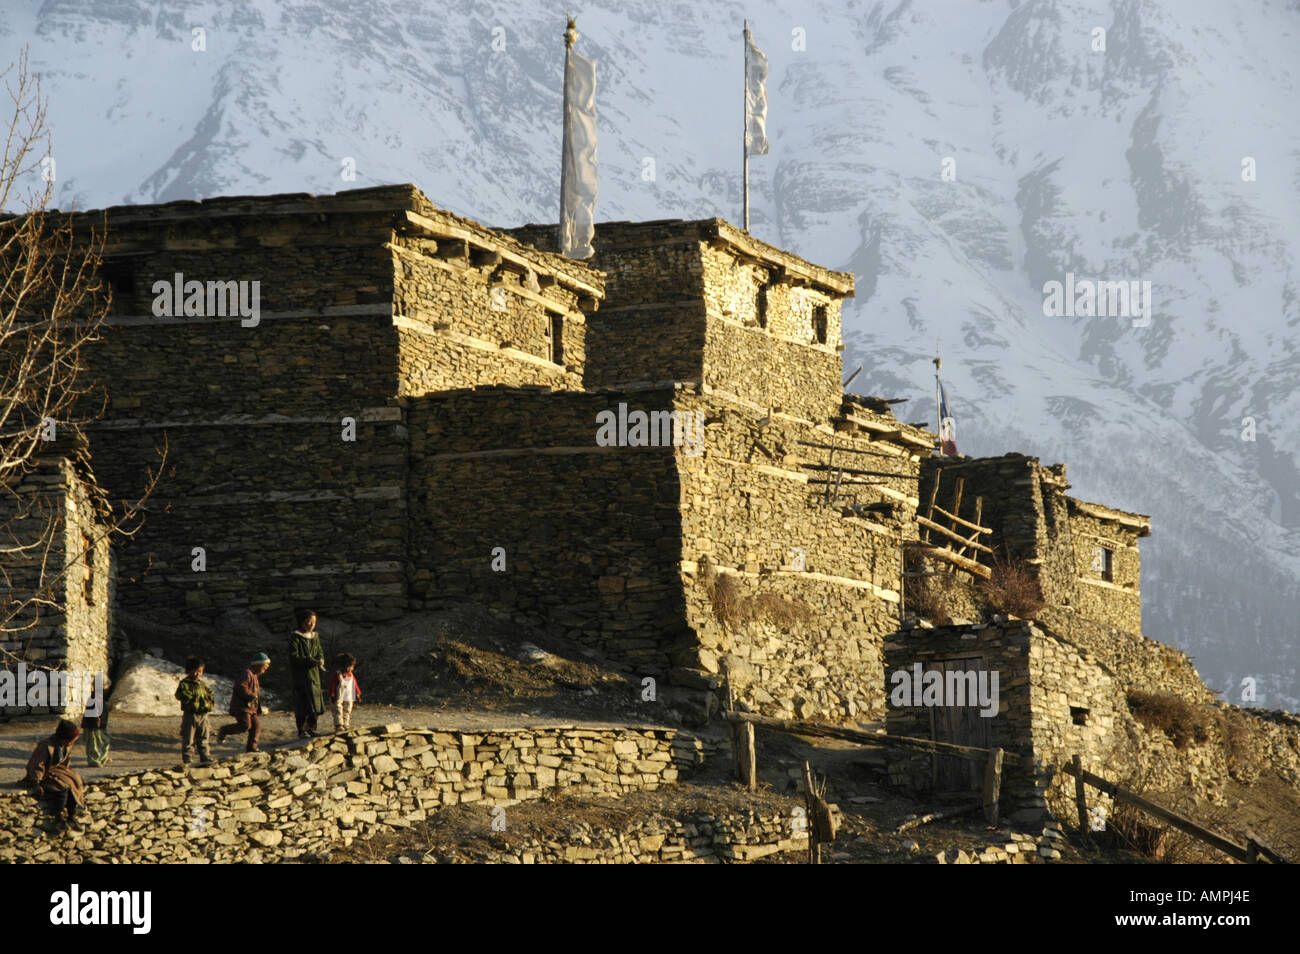 Children seem small next to stone houses in the evening light Ngawal Annapurna Region Nepal Stock Photo